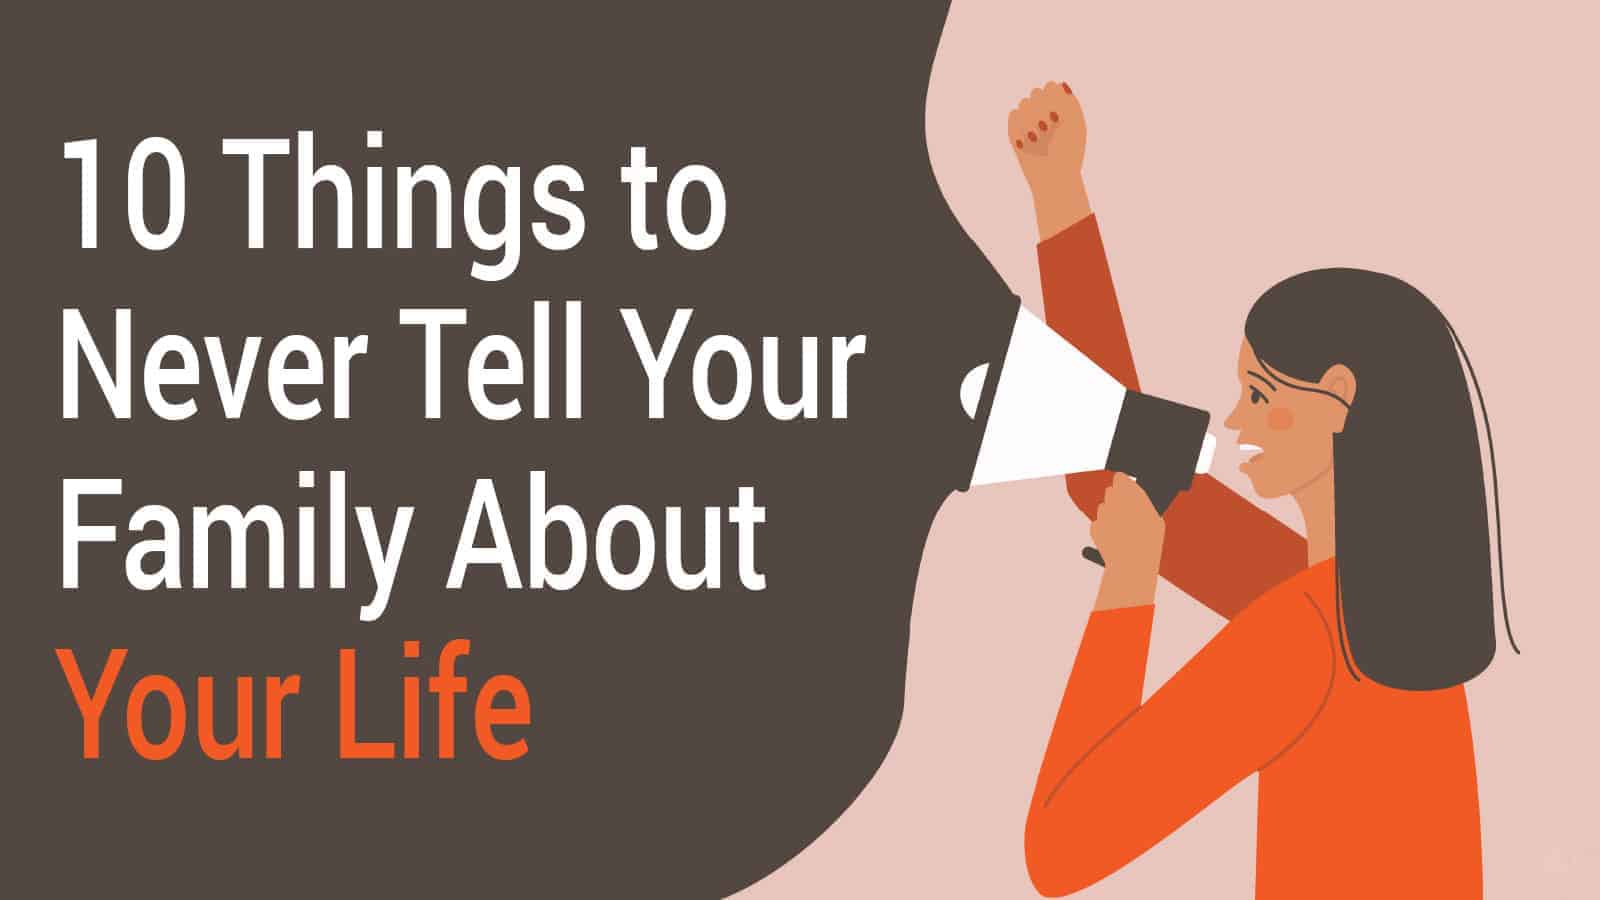 10 Things to Never Tell Your Family About Your Life